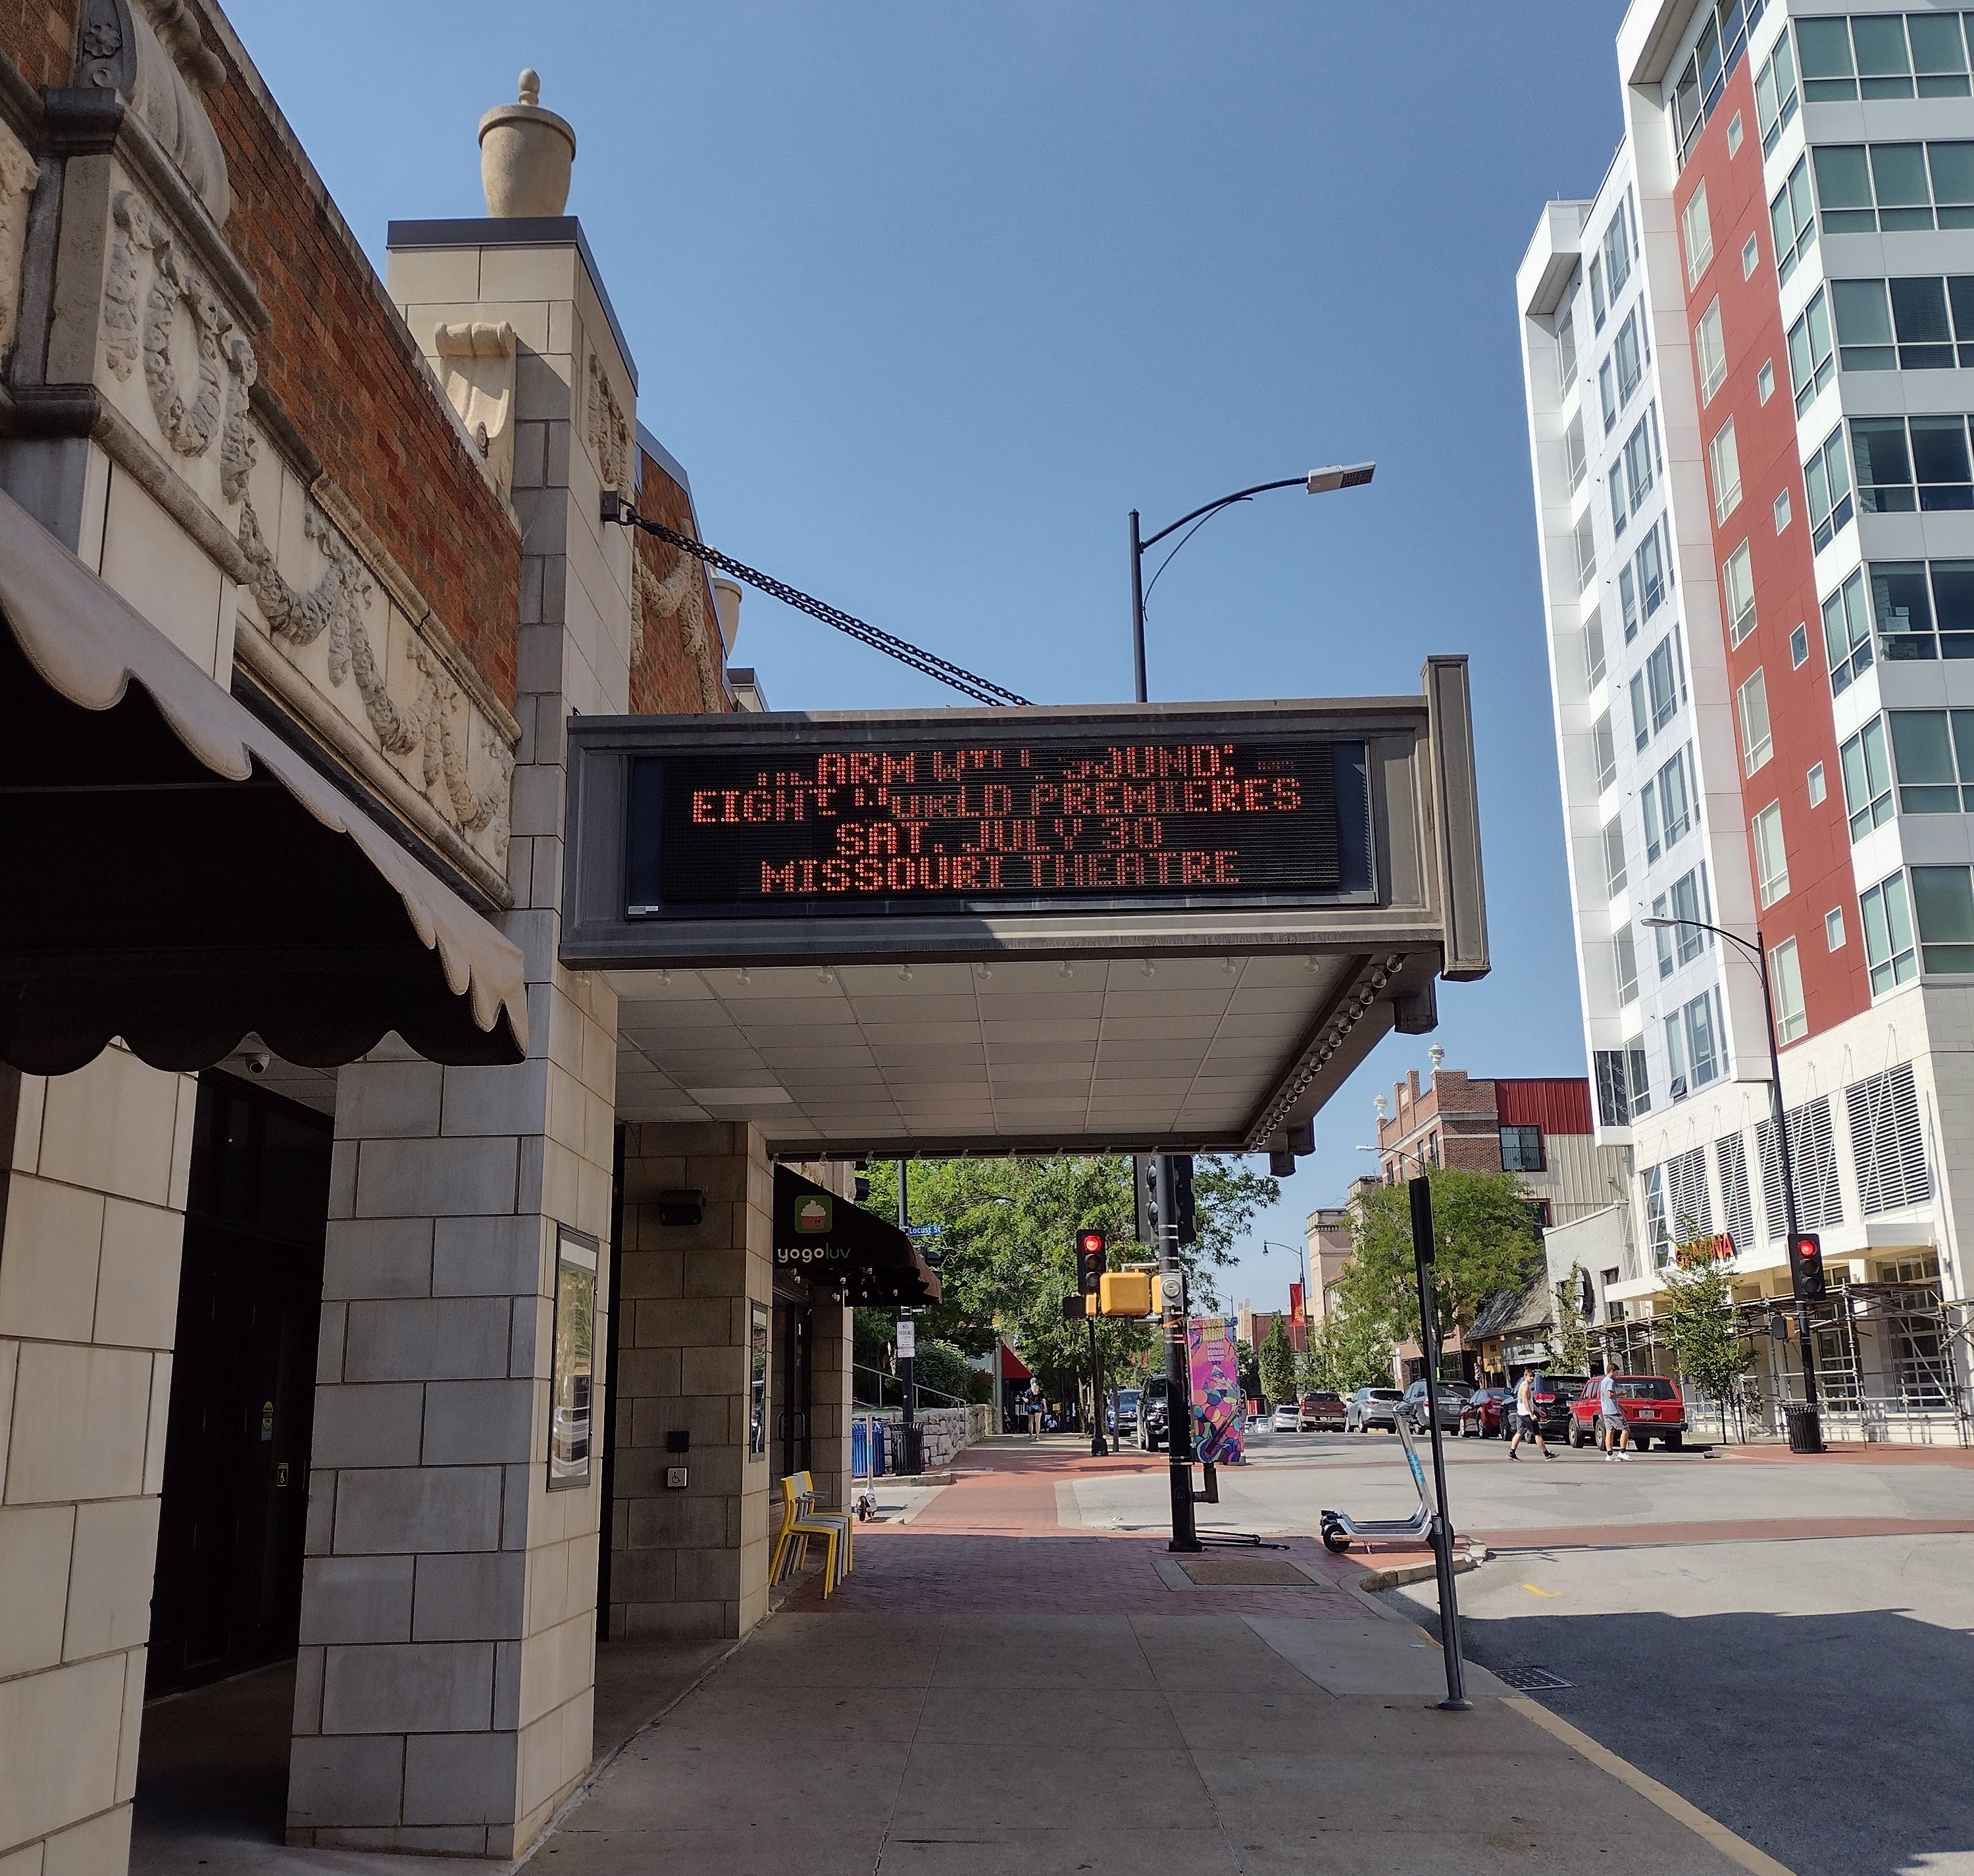 The marquee of the Missouri Theater reads "ALARM WILL SOUND; EIGHT WORLD PREMIERES; SAT, JULY 30; MISSOURI THEATER" with a clear blue sky behind it. Some pixels are missing so the text is hard to read.